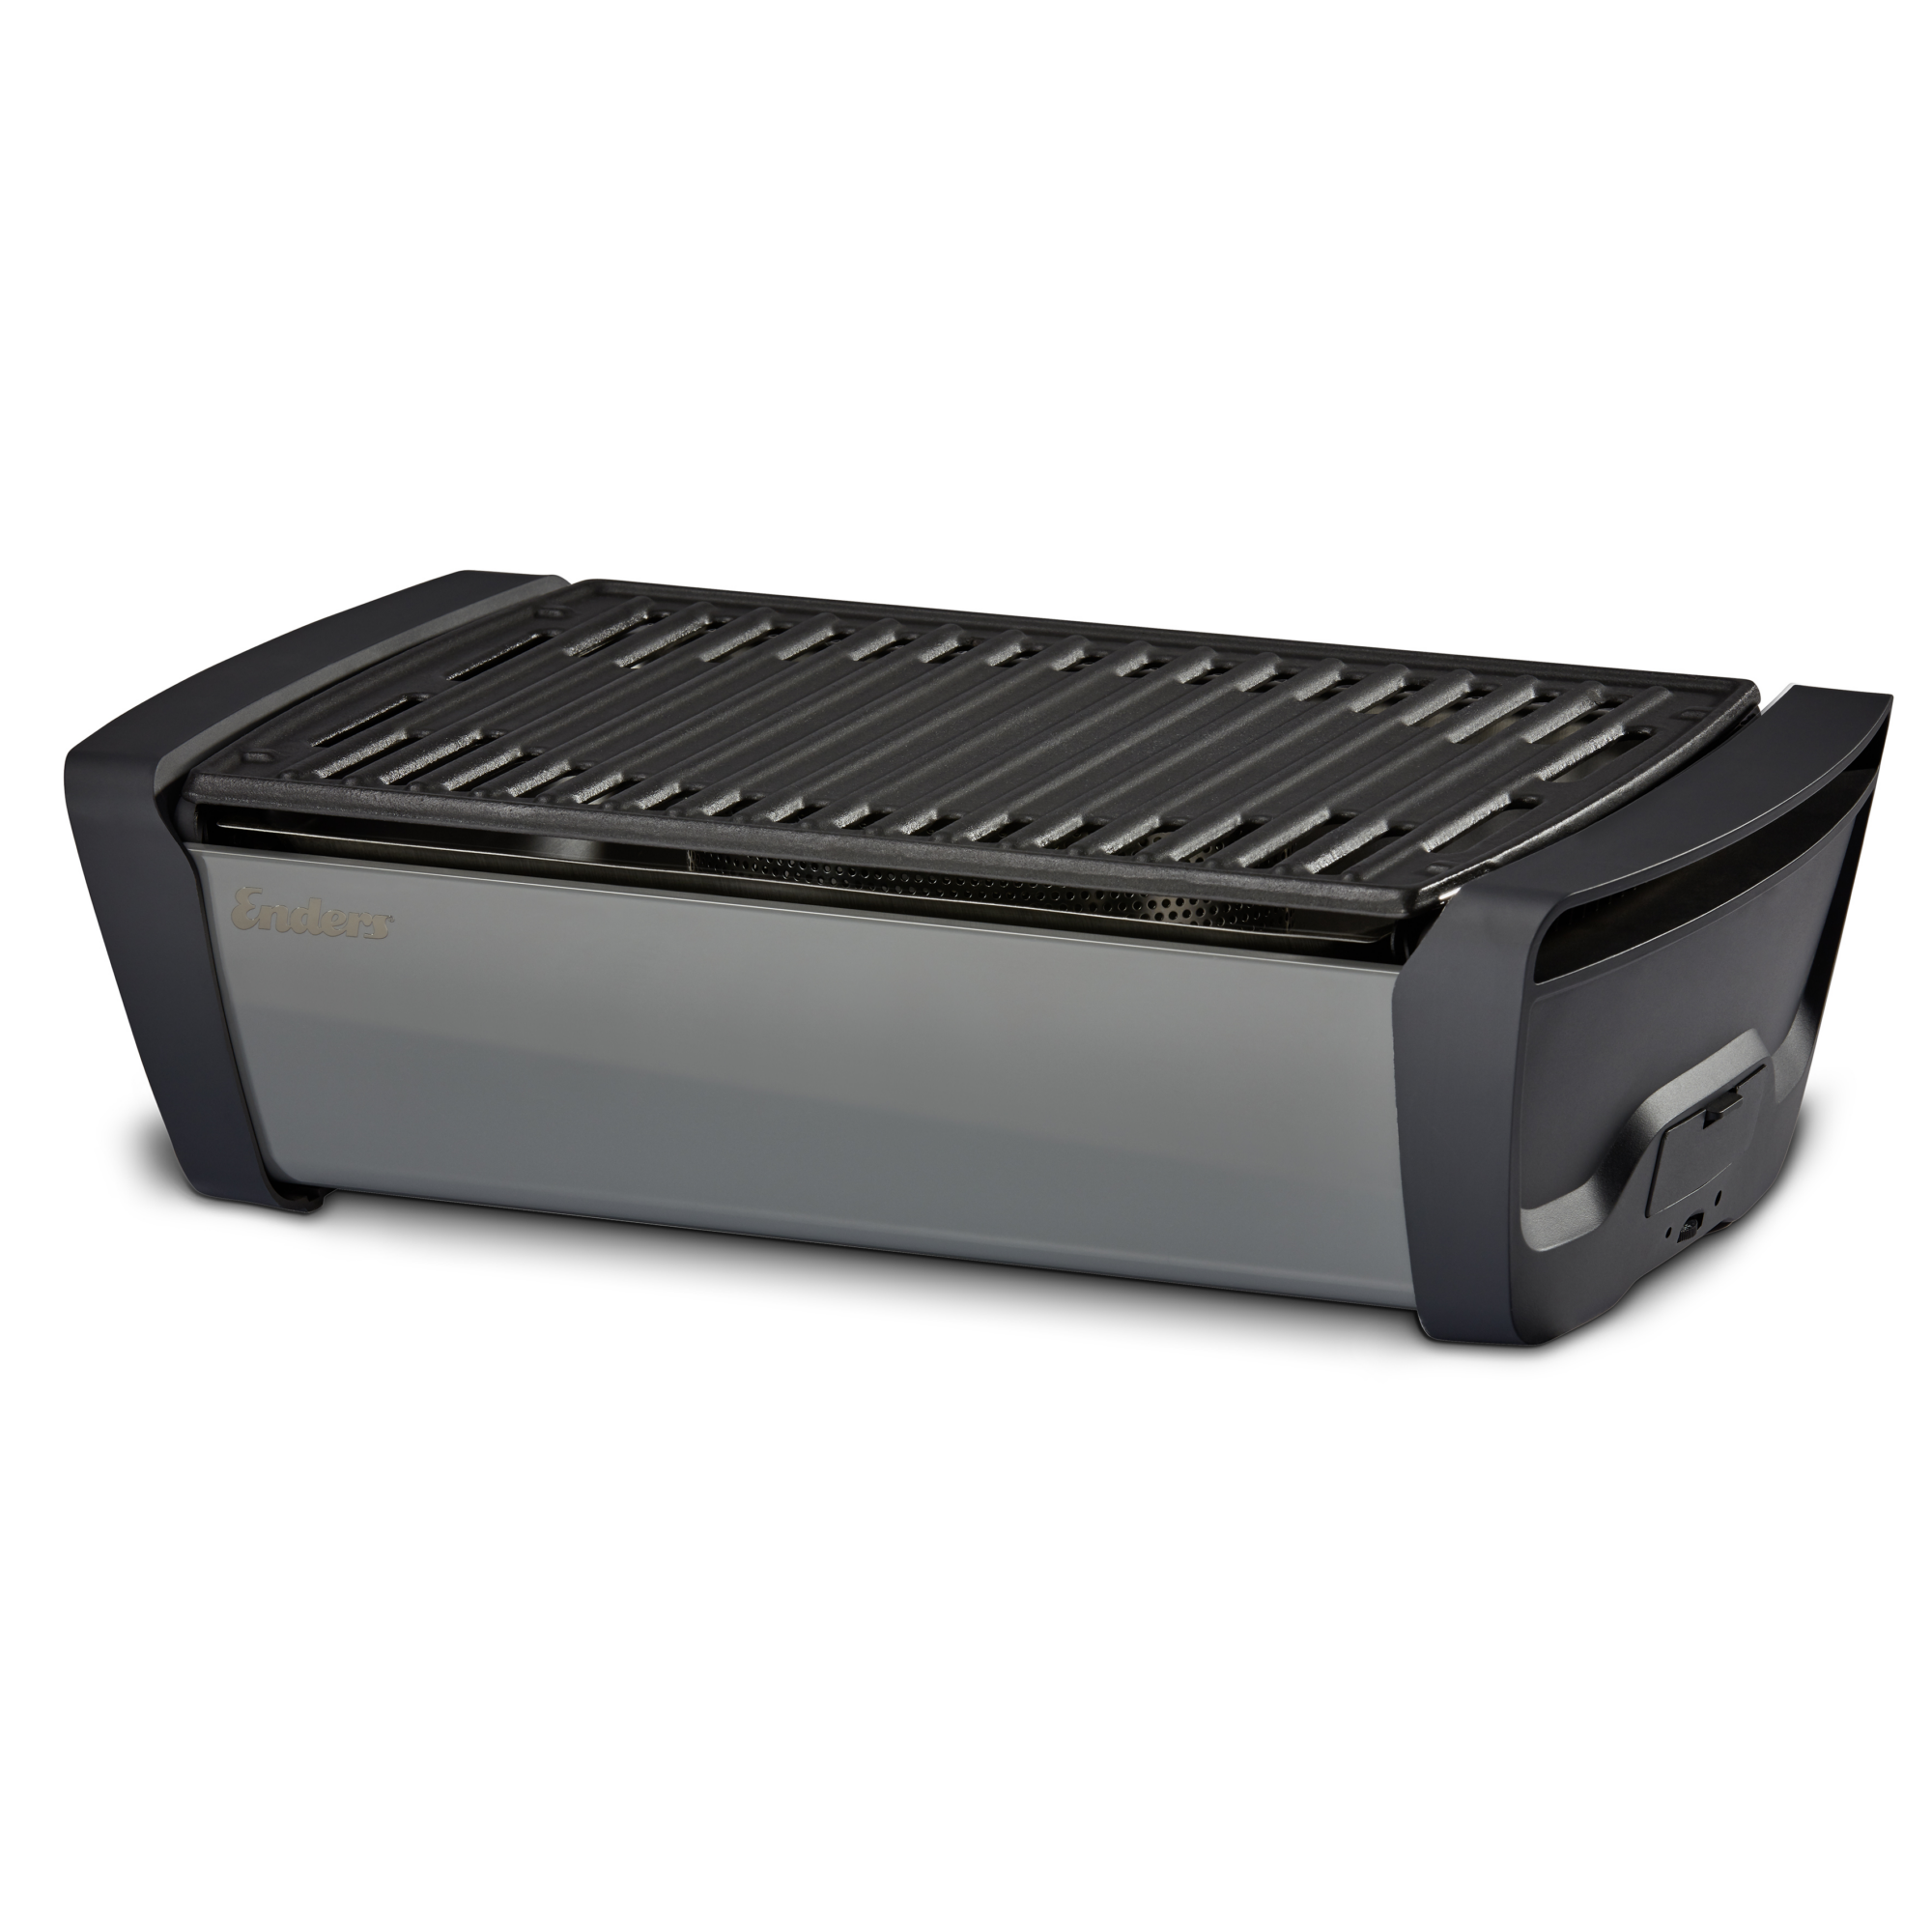 Holzkohle-Tischgrill 'Aurora Pro' grau + product picture